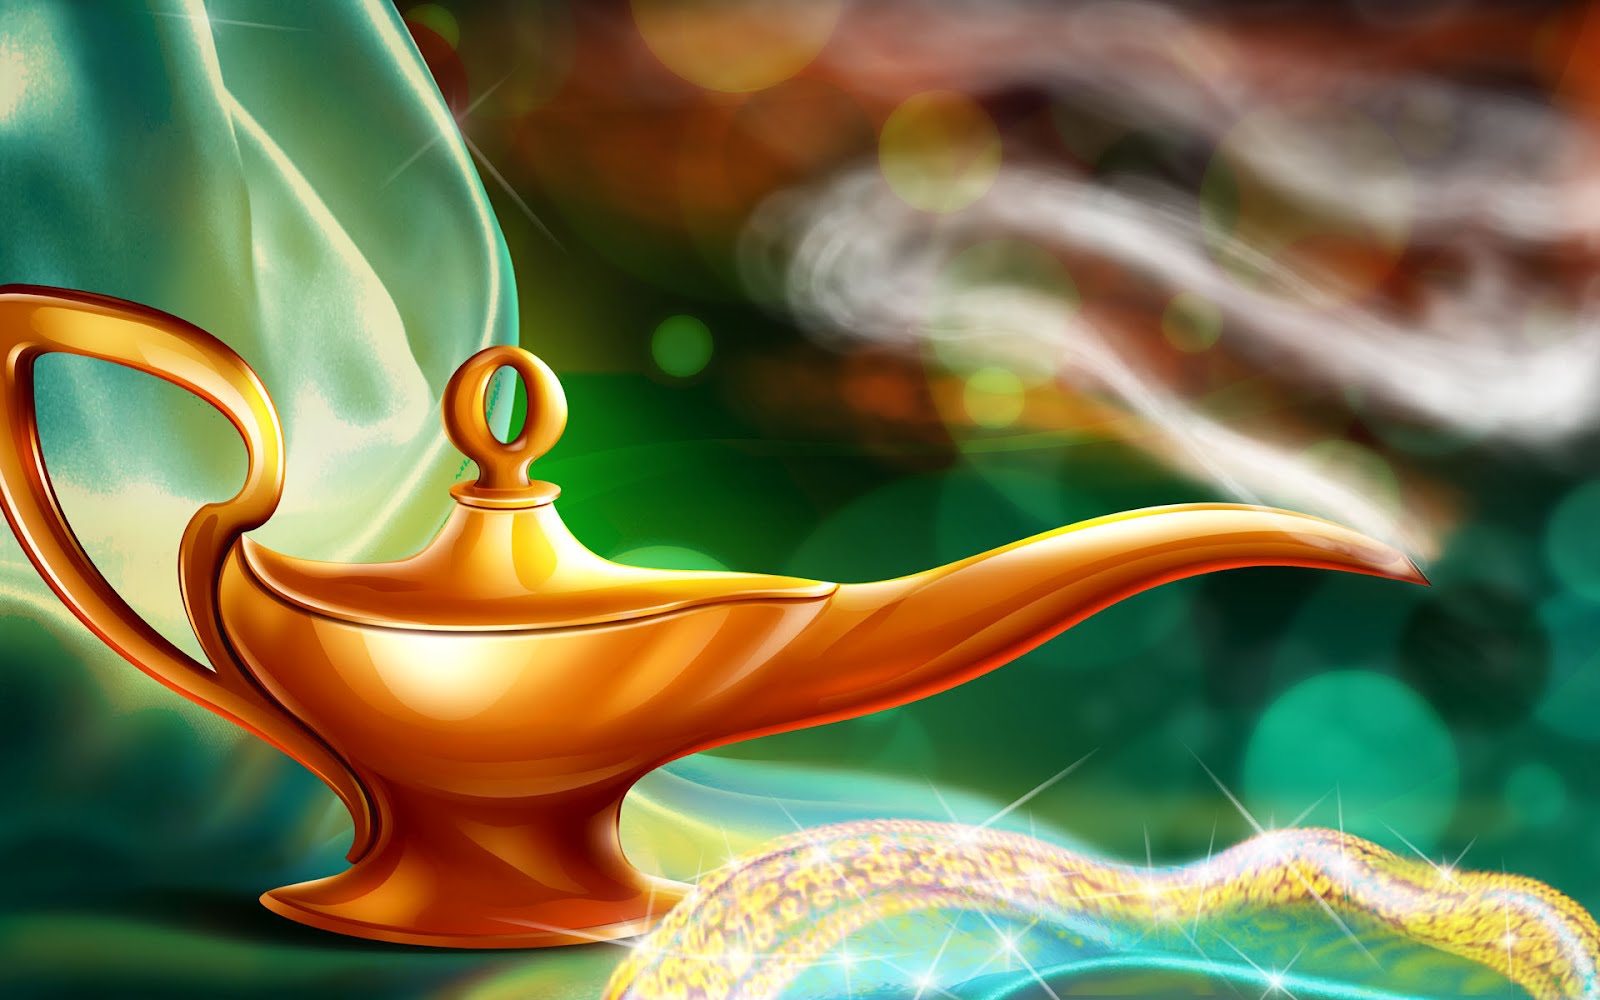 ... Wallpapers, Amazing Wallpapers, 3D Wallpaper: Free Magic Wallpapers